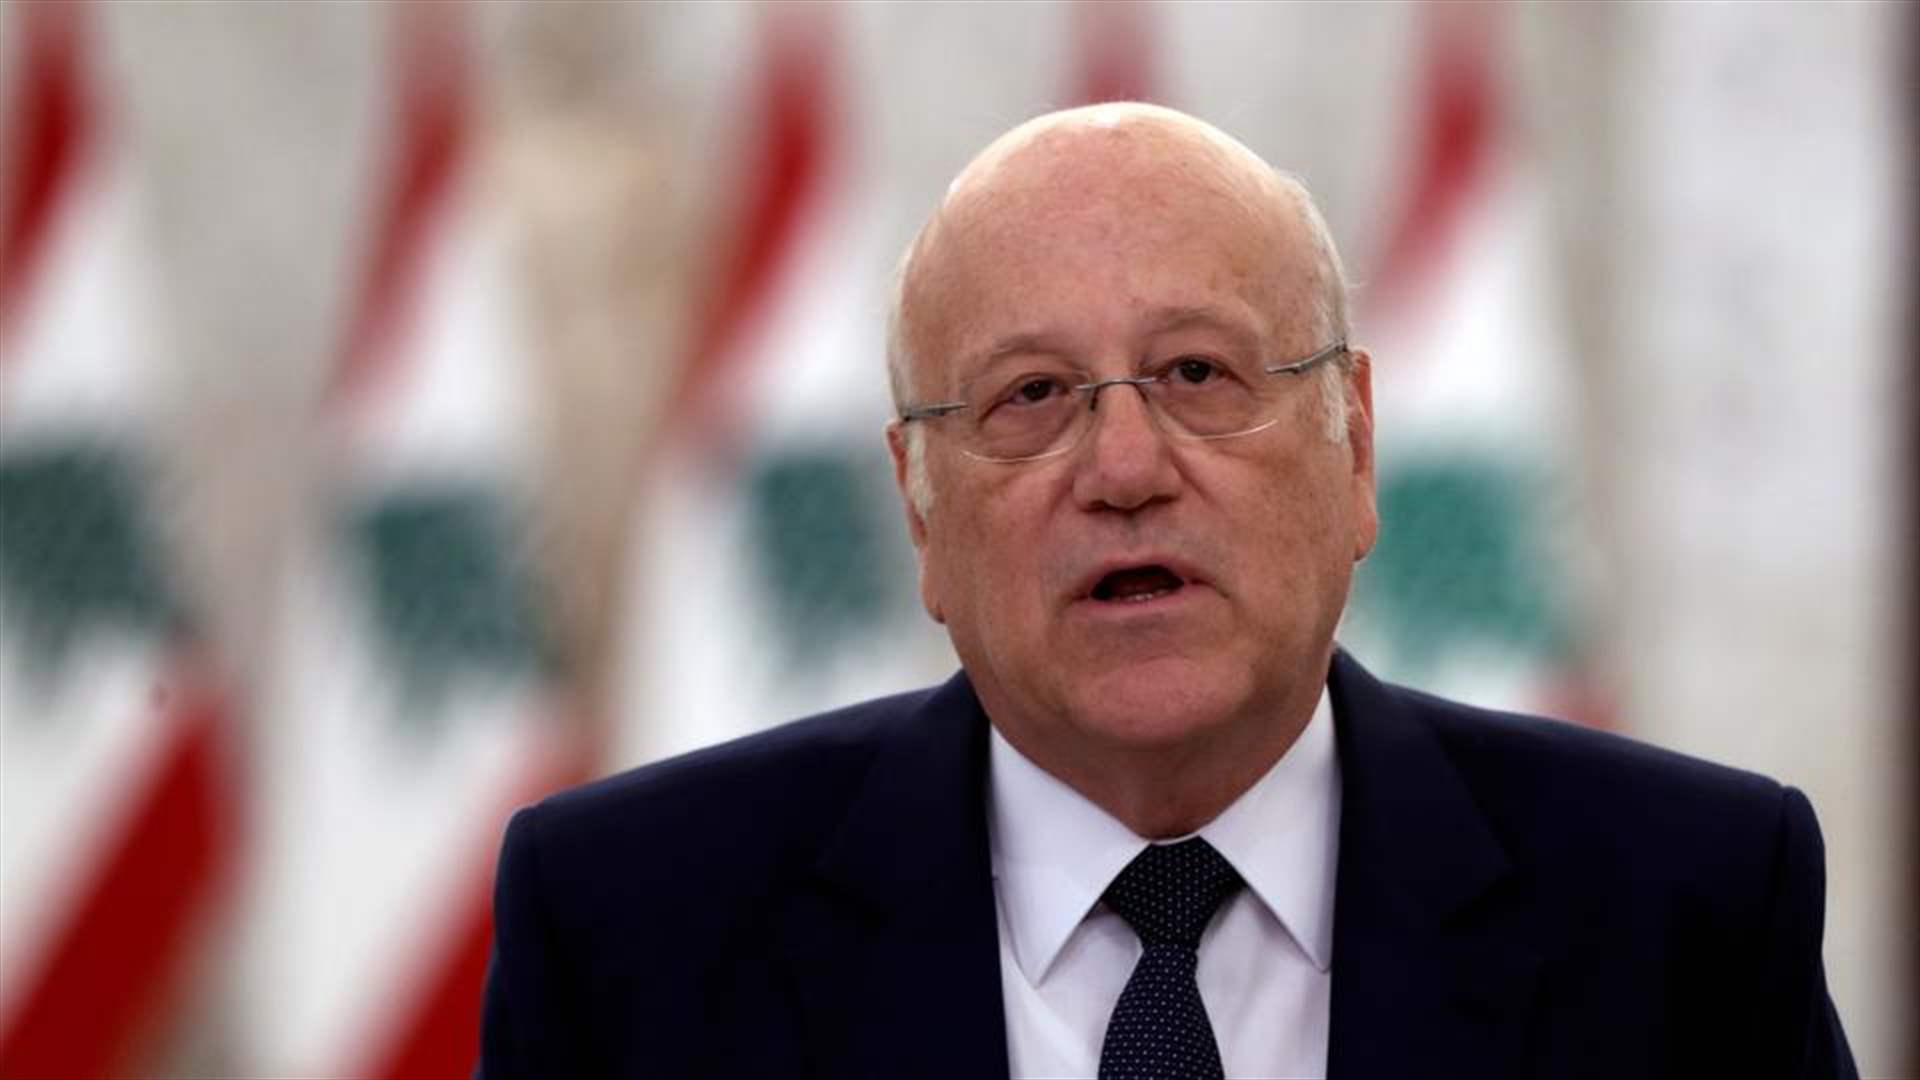 Mikati meets with Palestinian officials to discuss peace efforts in Ain al-Hilweh